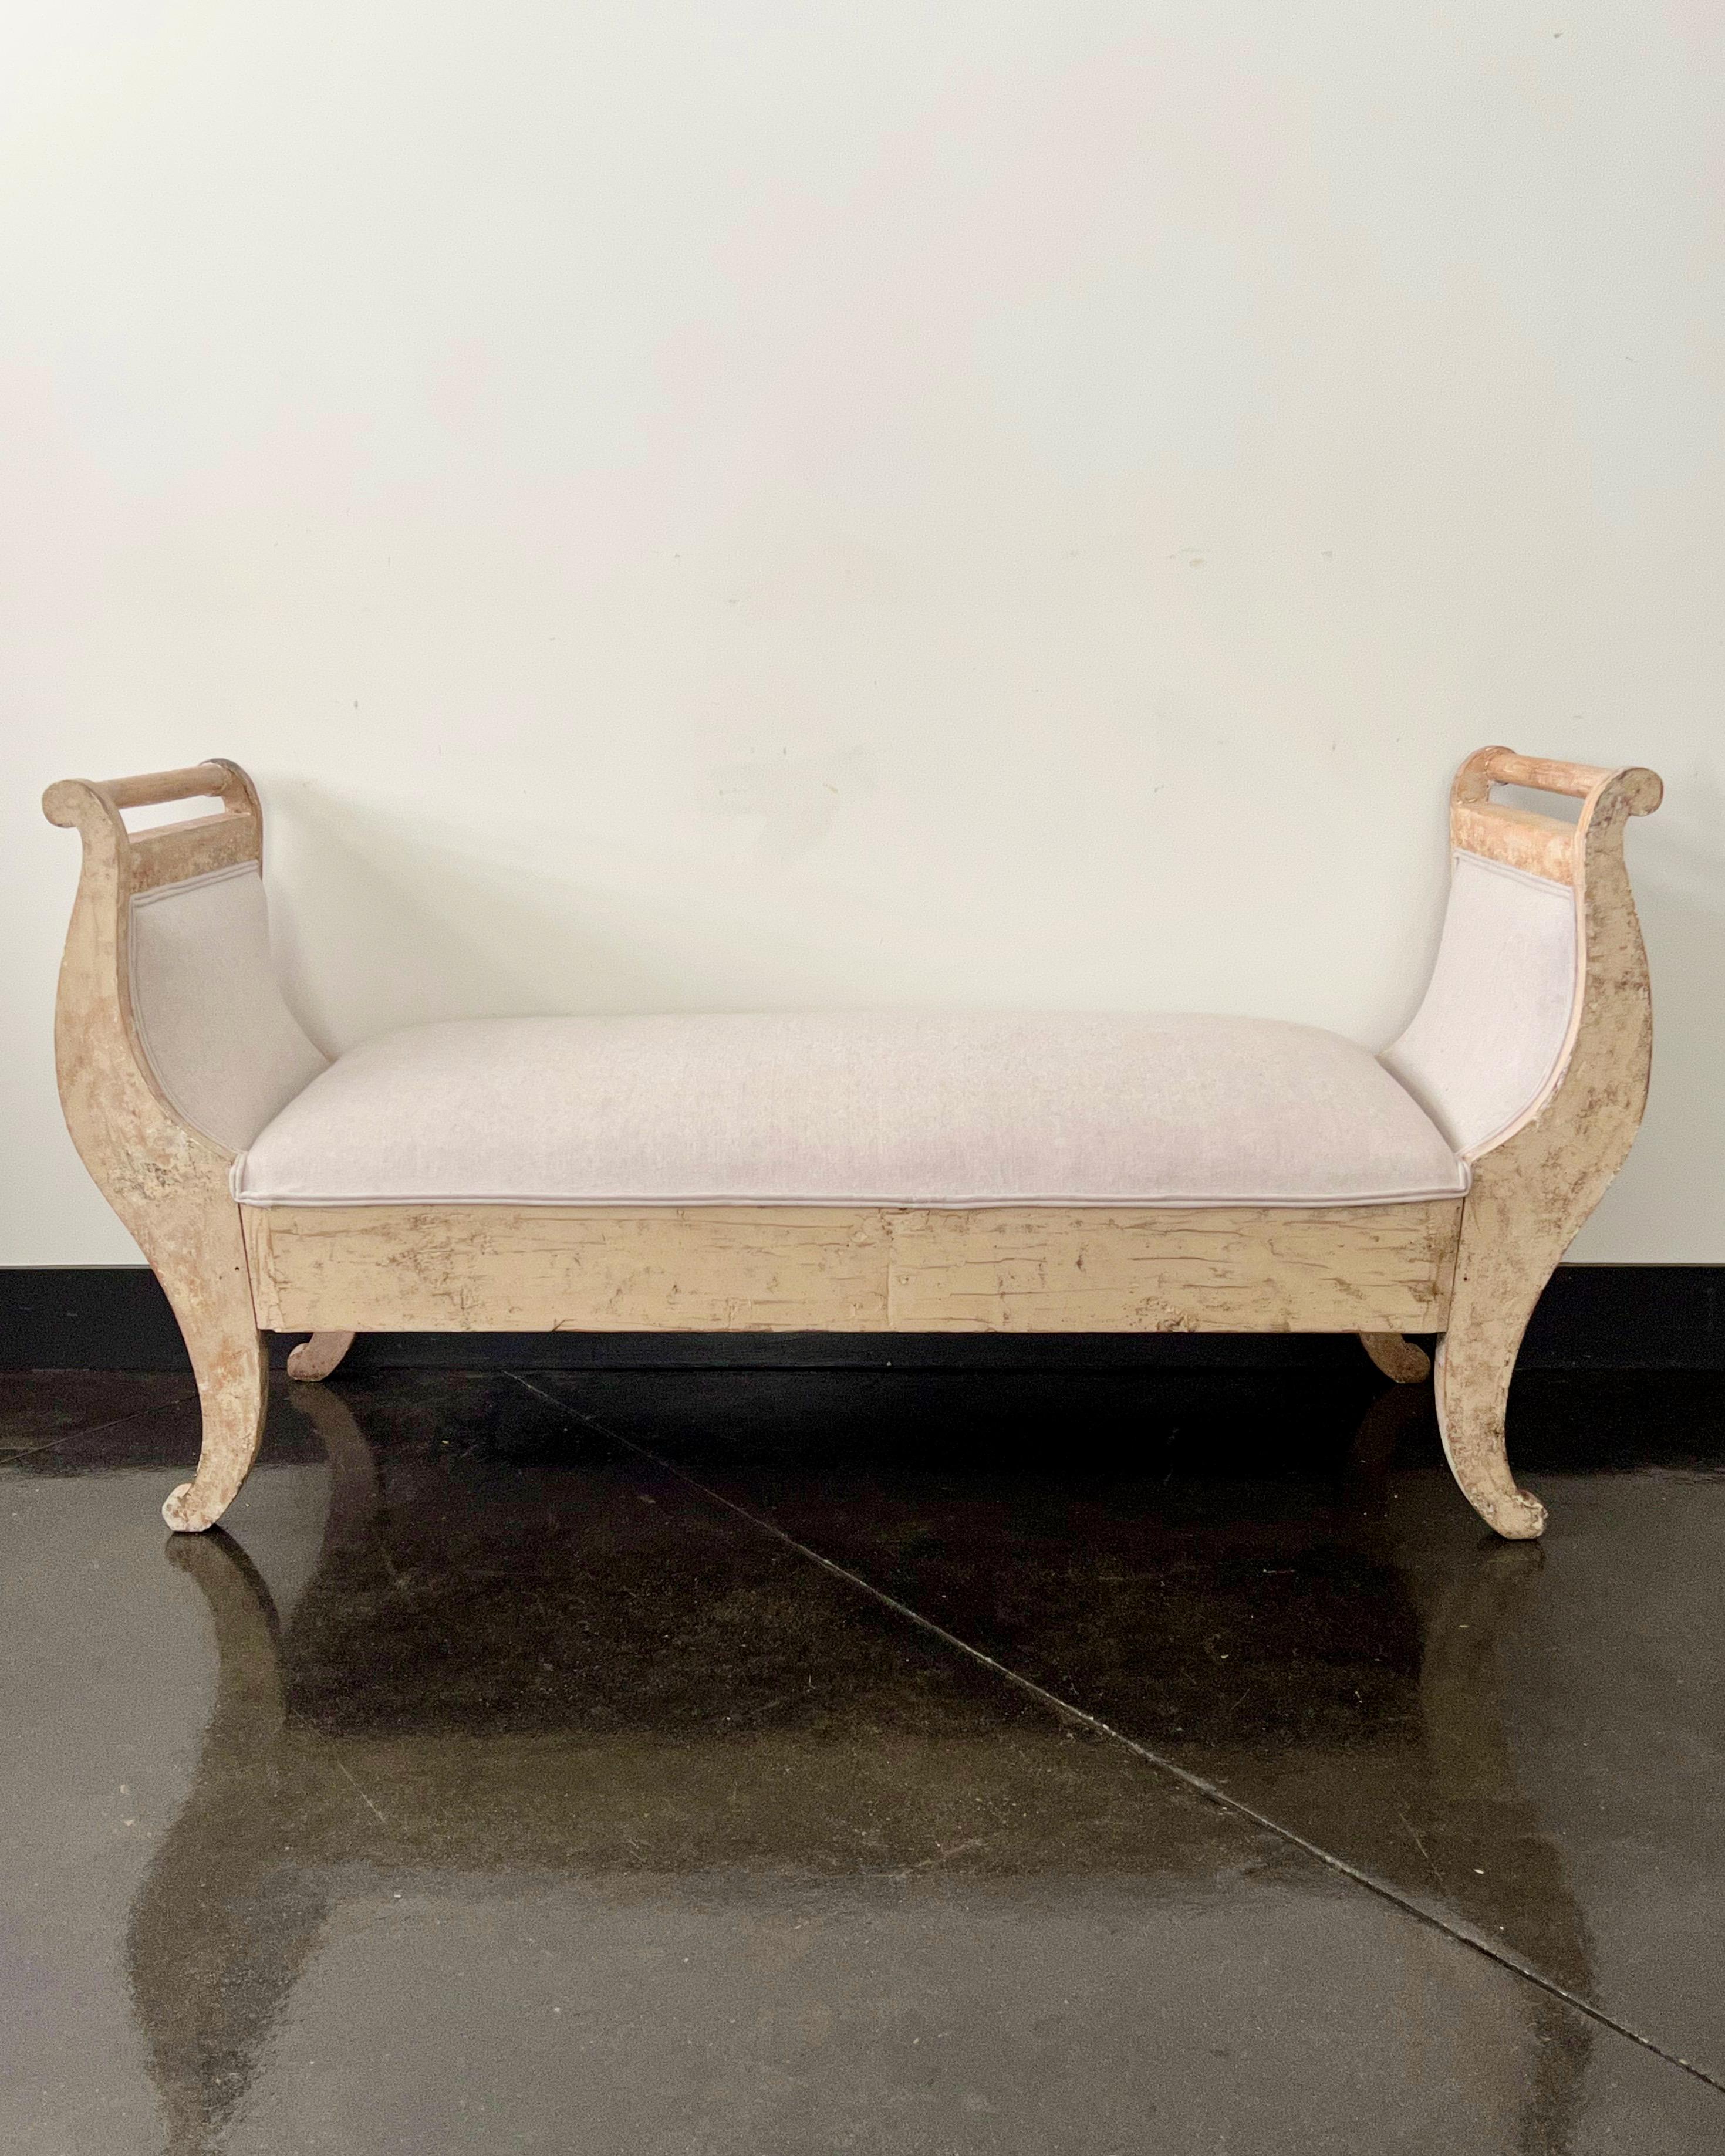 Hand-Carved 19th Century, Swedish Daybed / Settee